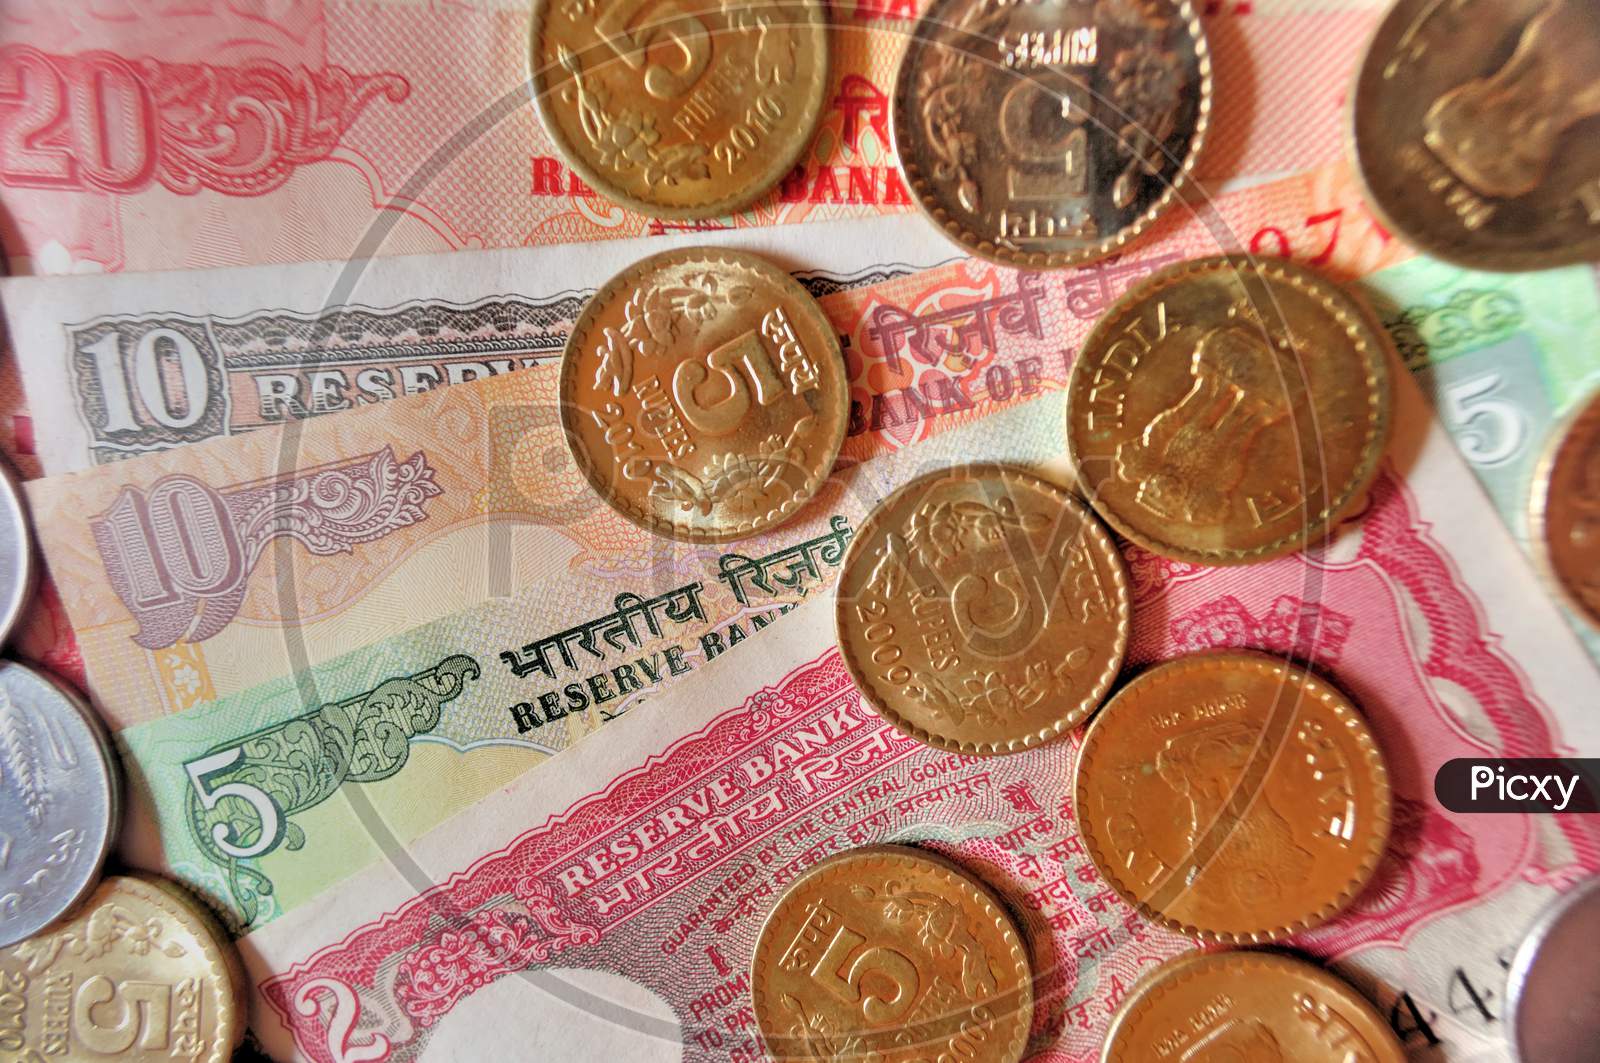 Indian Currency Notes And Coins